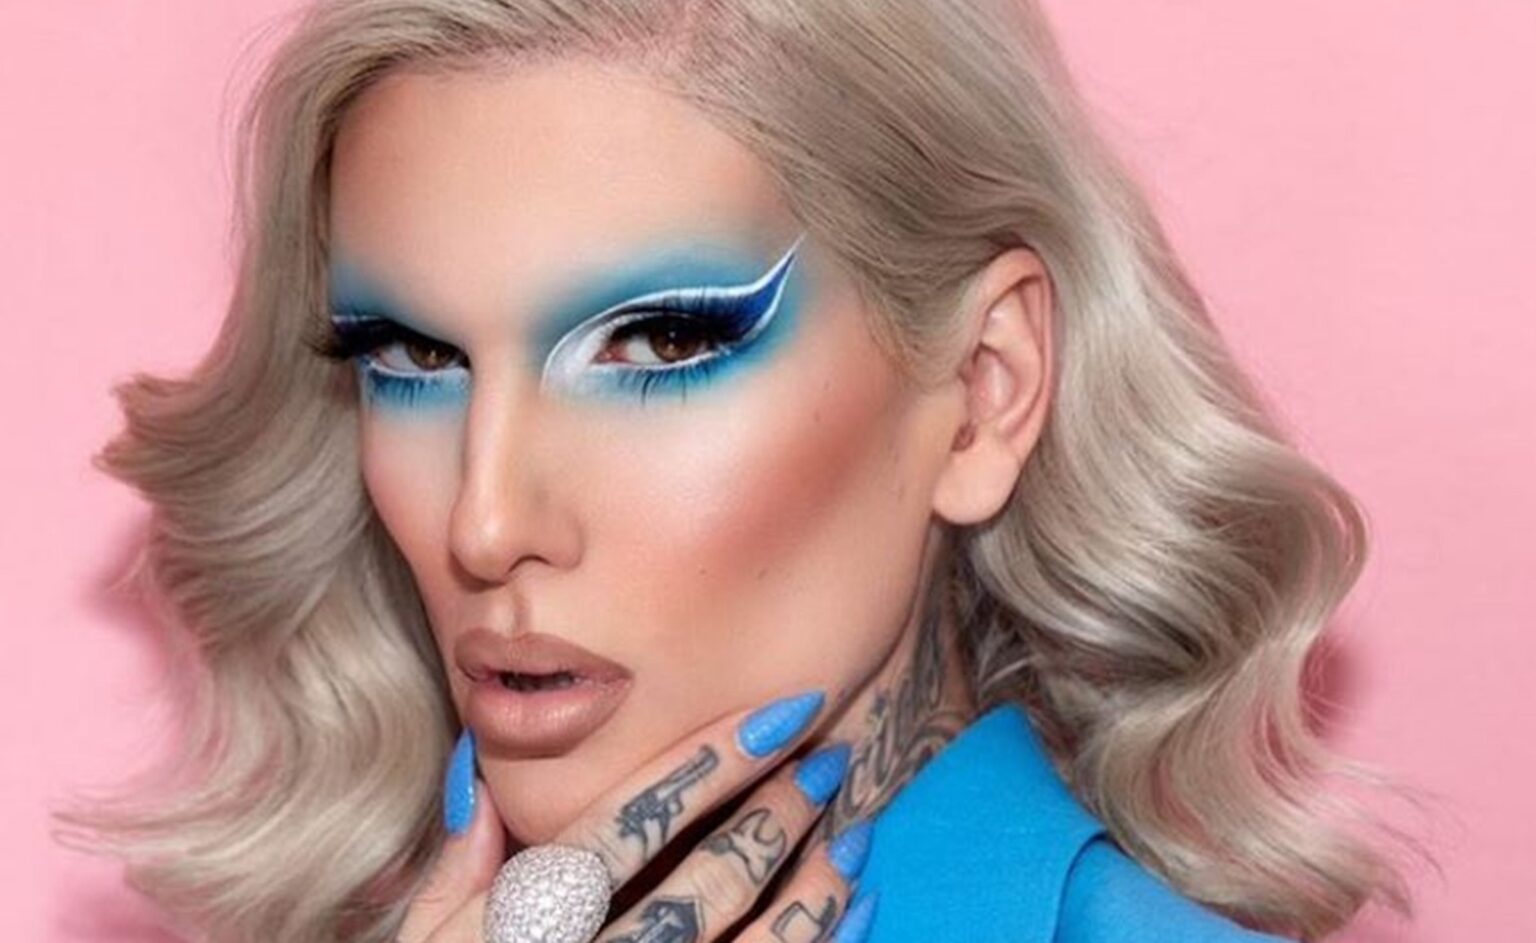 Shane Dawson & Jeffree Star are being hit with a tidal wave of accountability – finally. Will Twitter every truly cancel them?